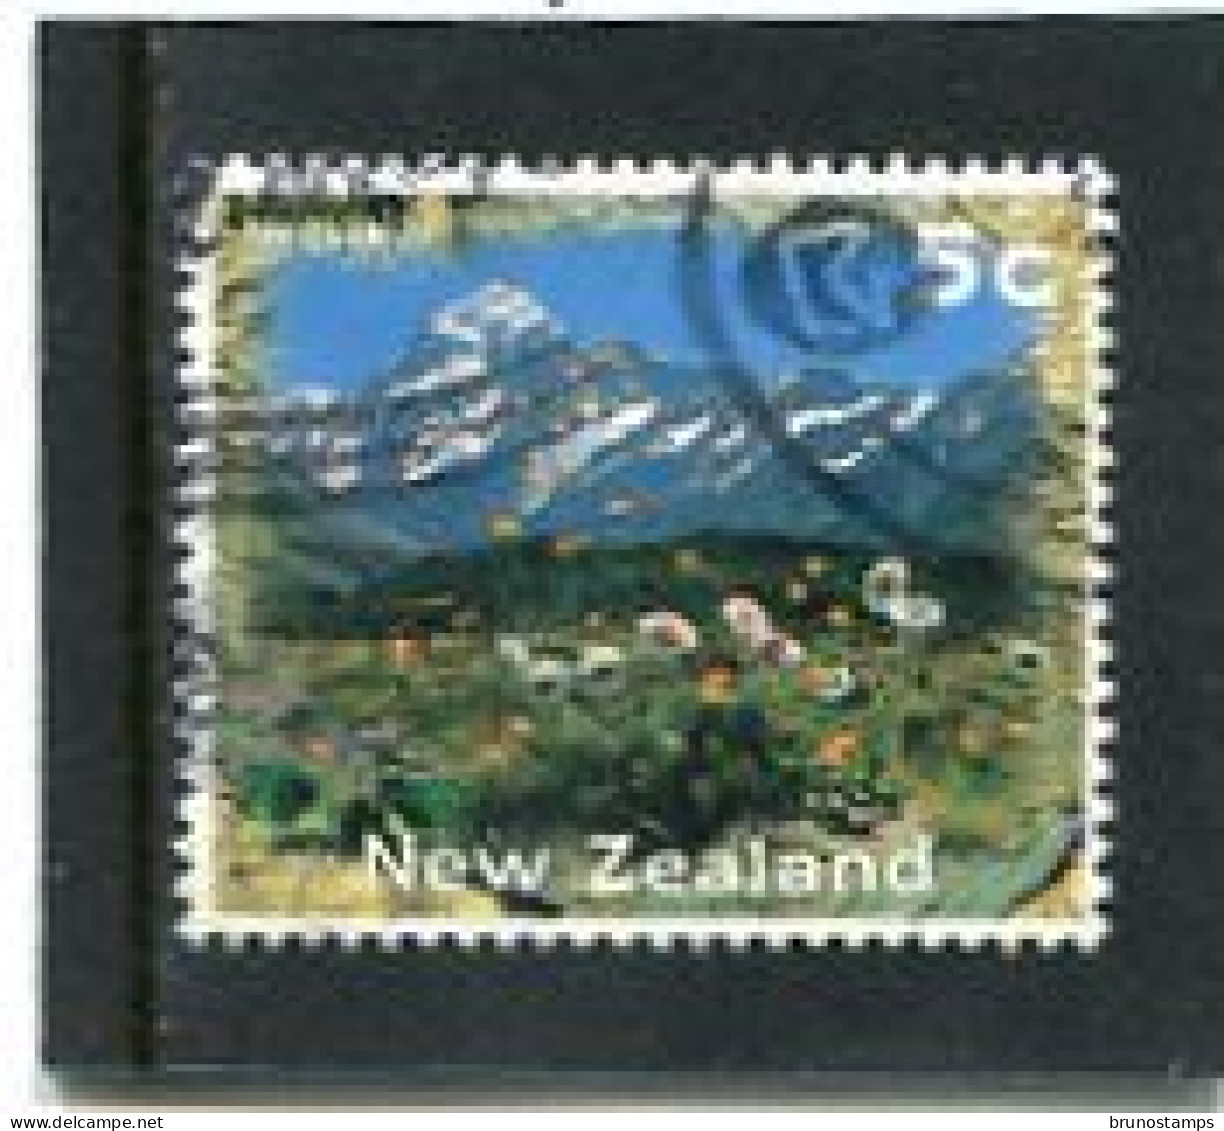 NEW ZEALAND - 1996   5c  MT COOK  FINE  USED - Used Stamps